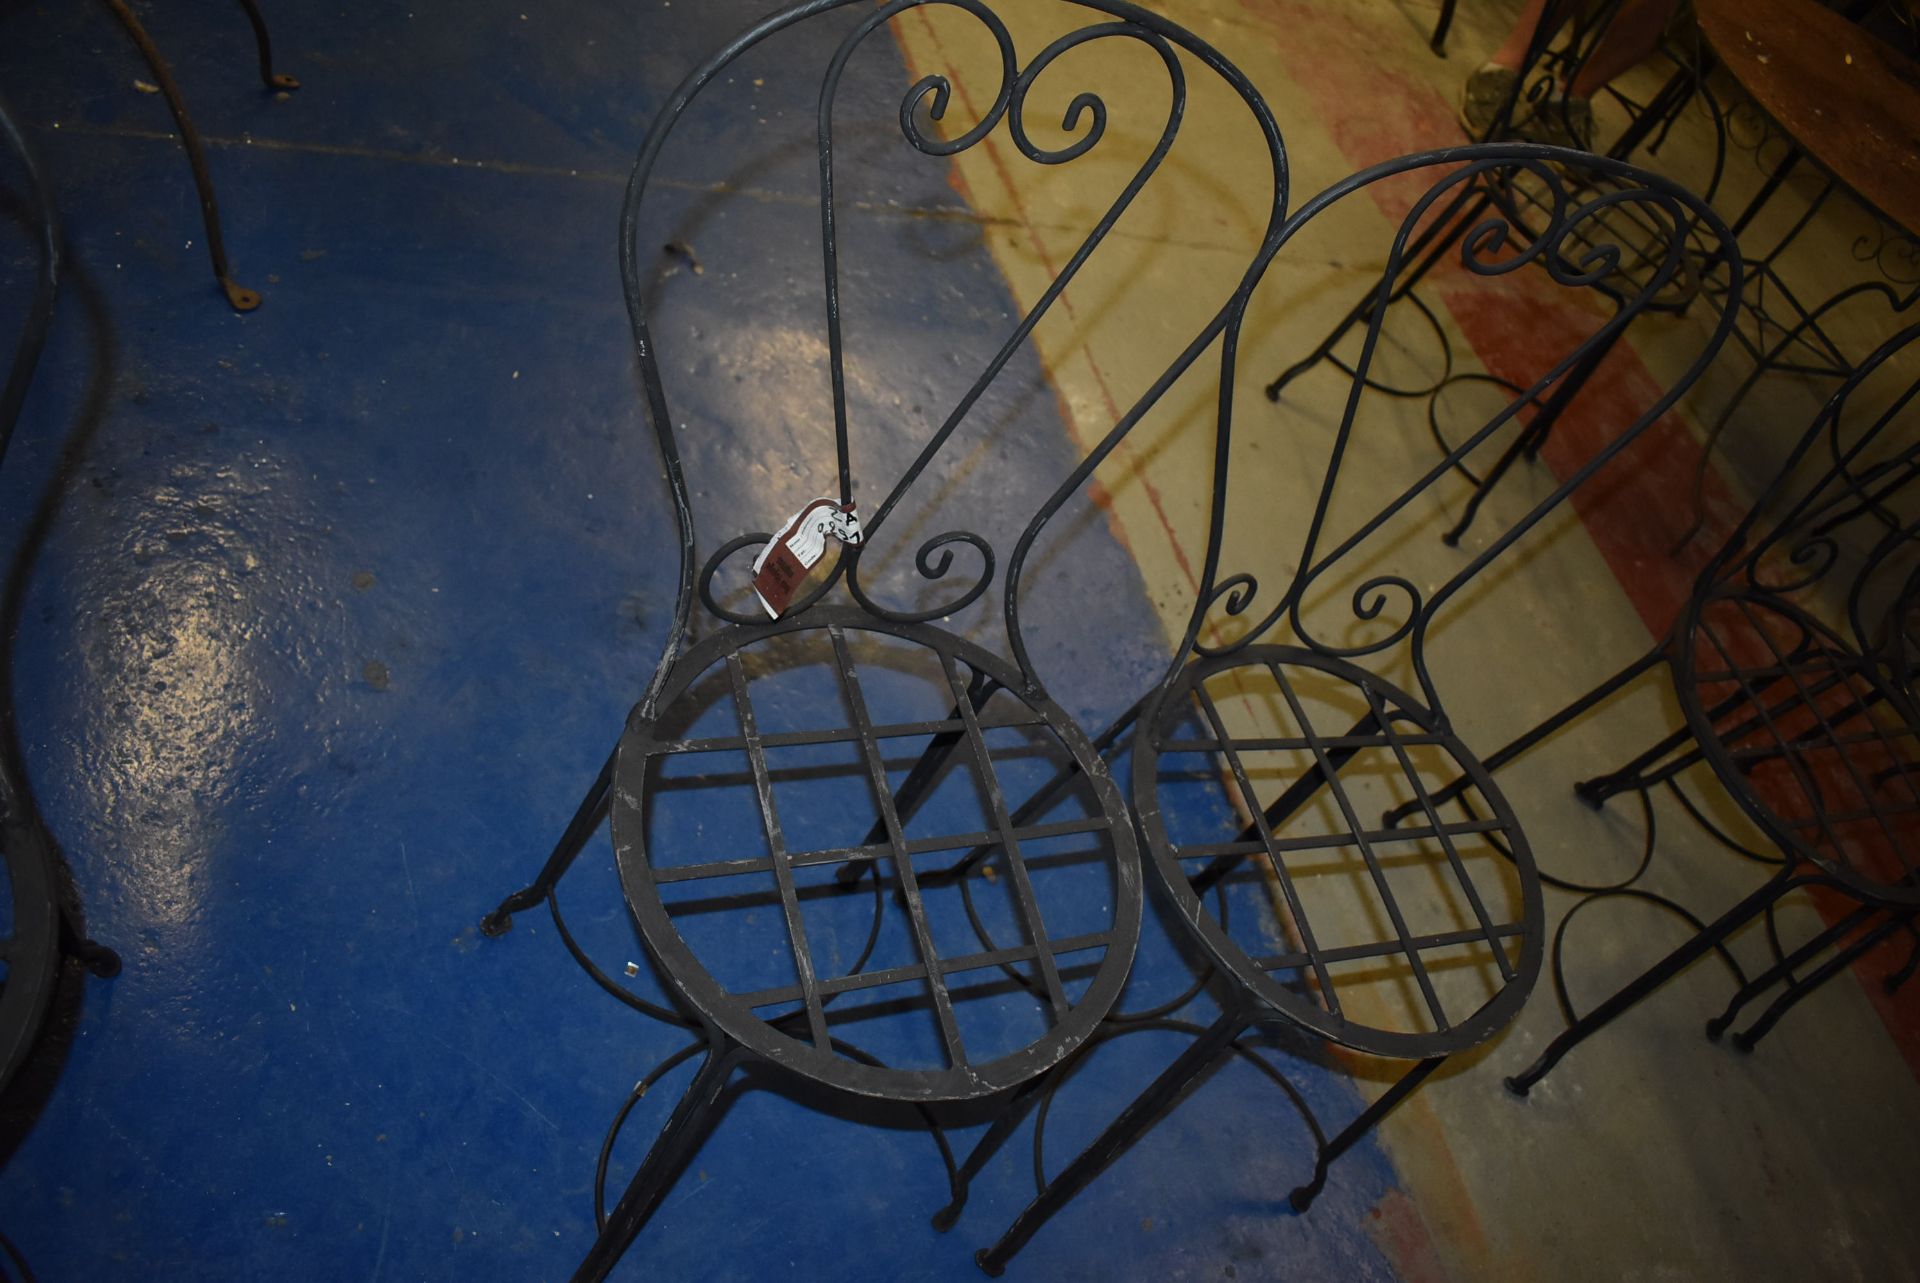 *Pair of Wrought Iron Bistro Chairs